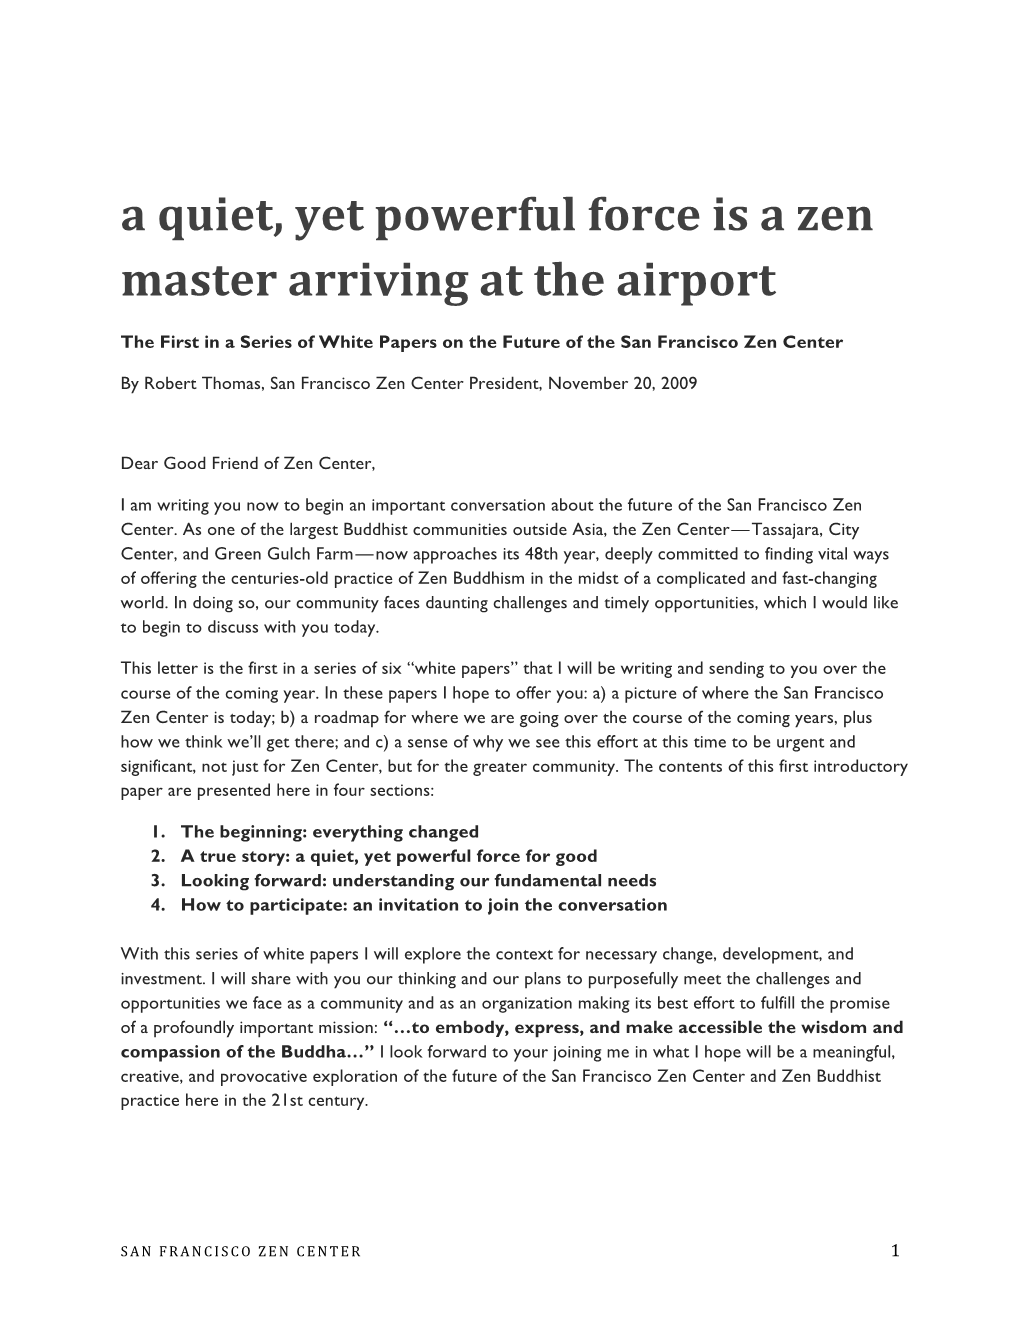 A Quiet, Yet Powerful Force Is a Zen Master Arriving at the Airport